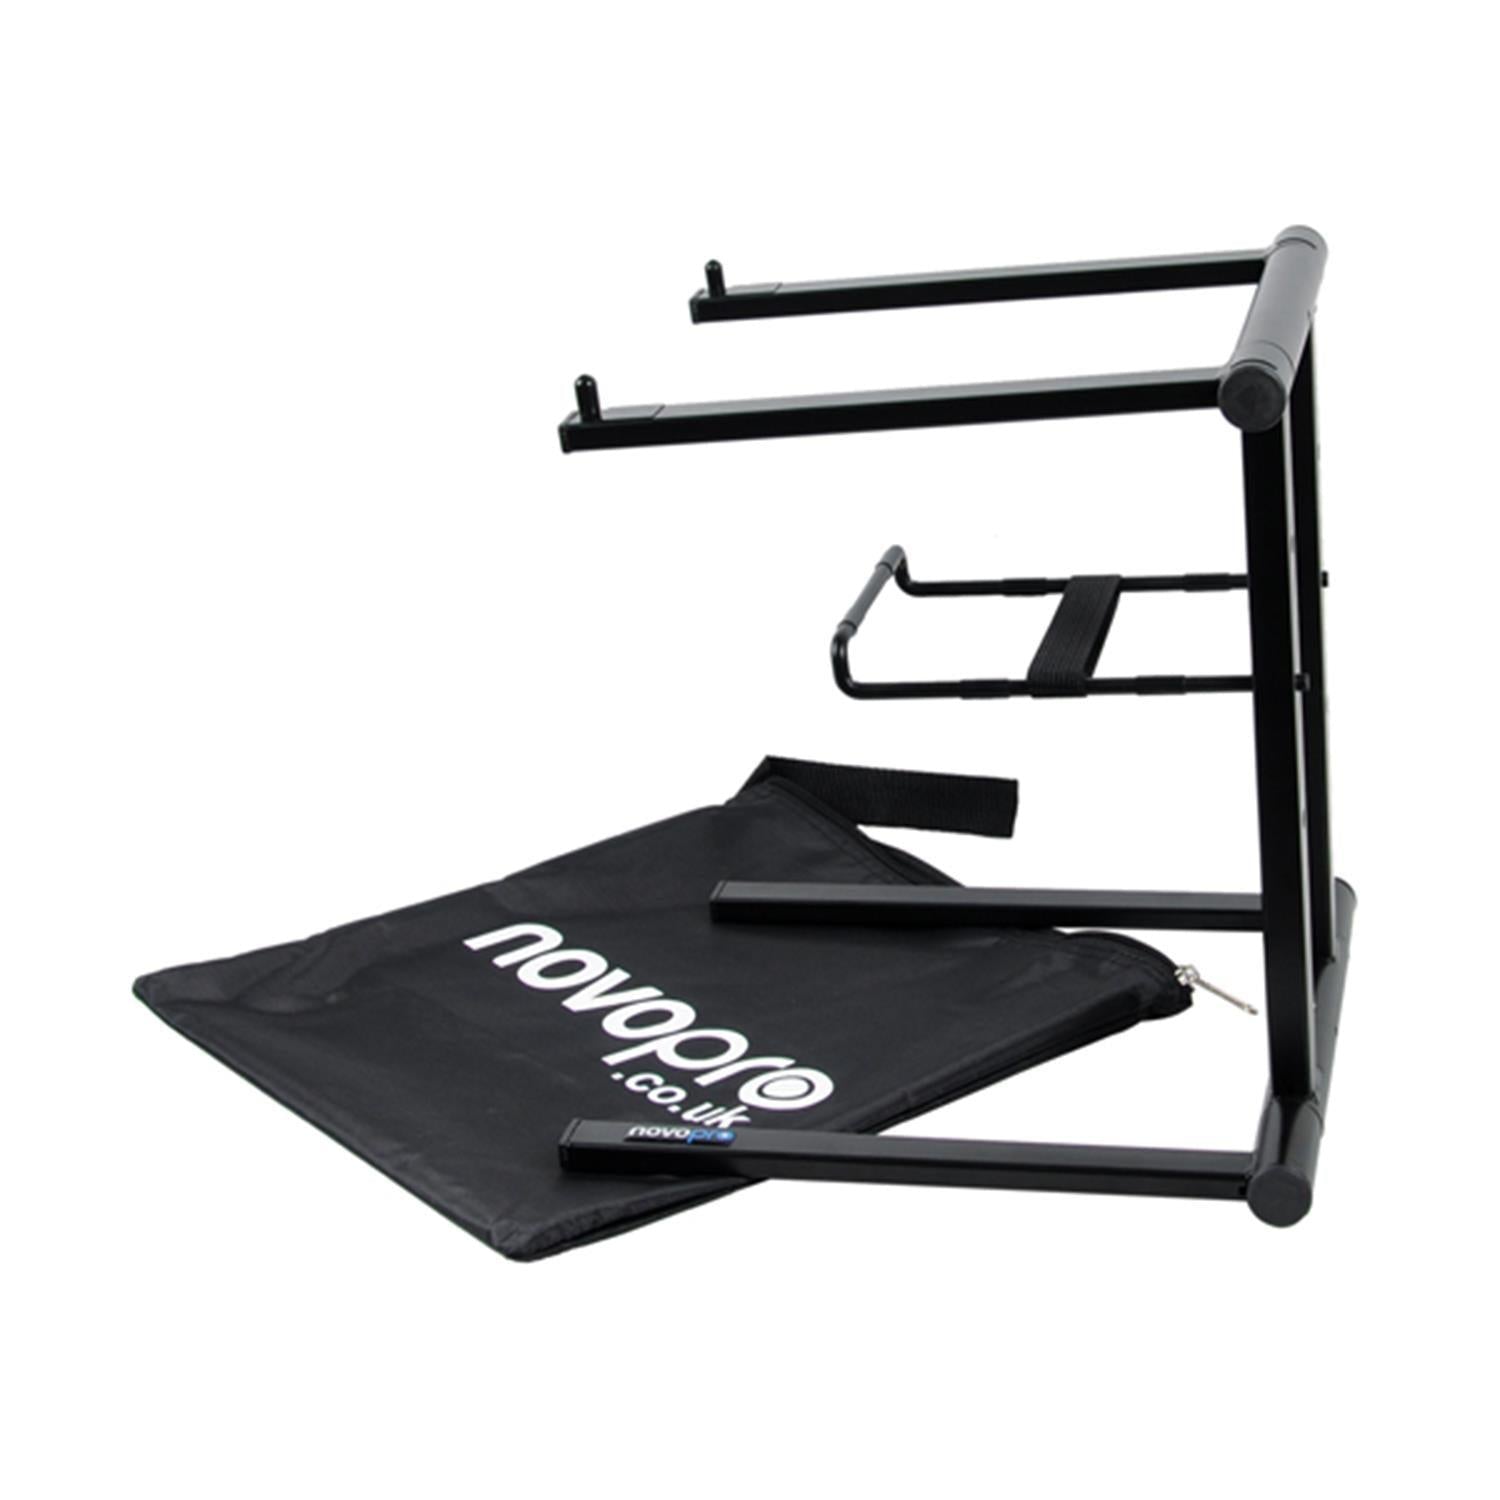 Novopro LS20 laptop stand and bag - DY Pro Audio